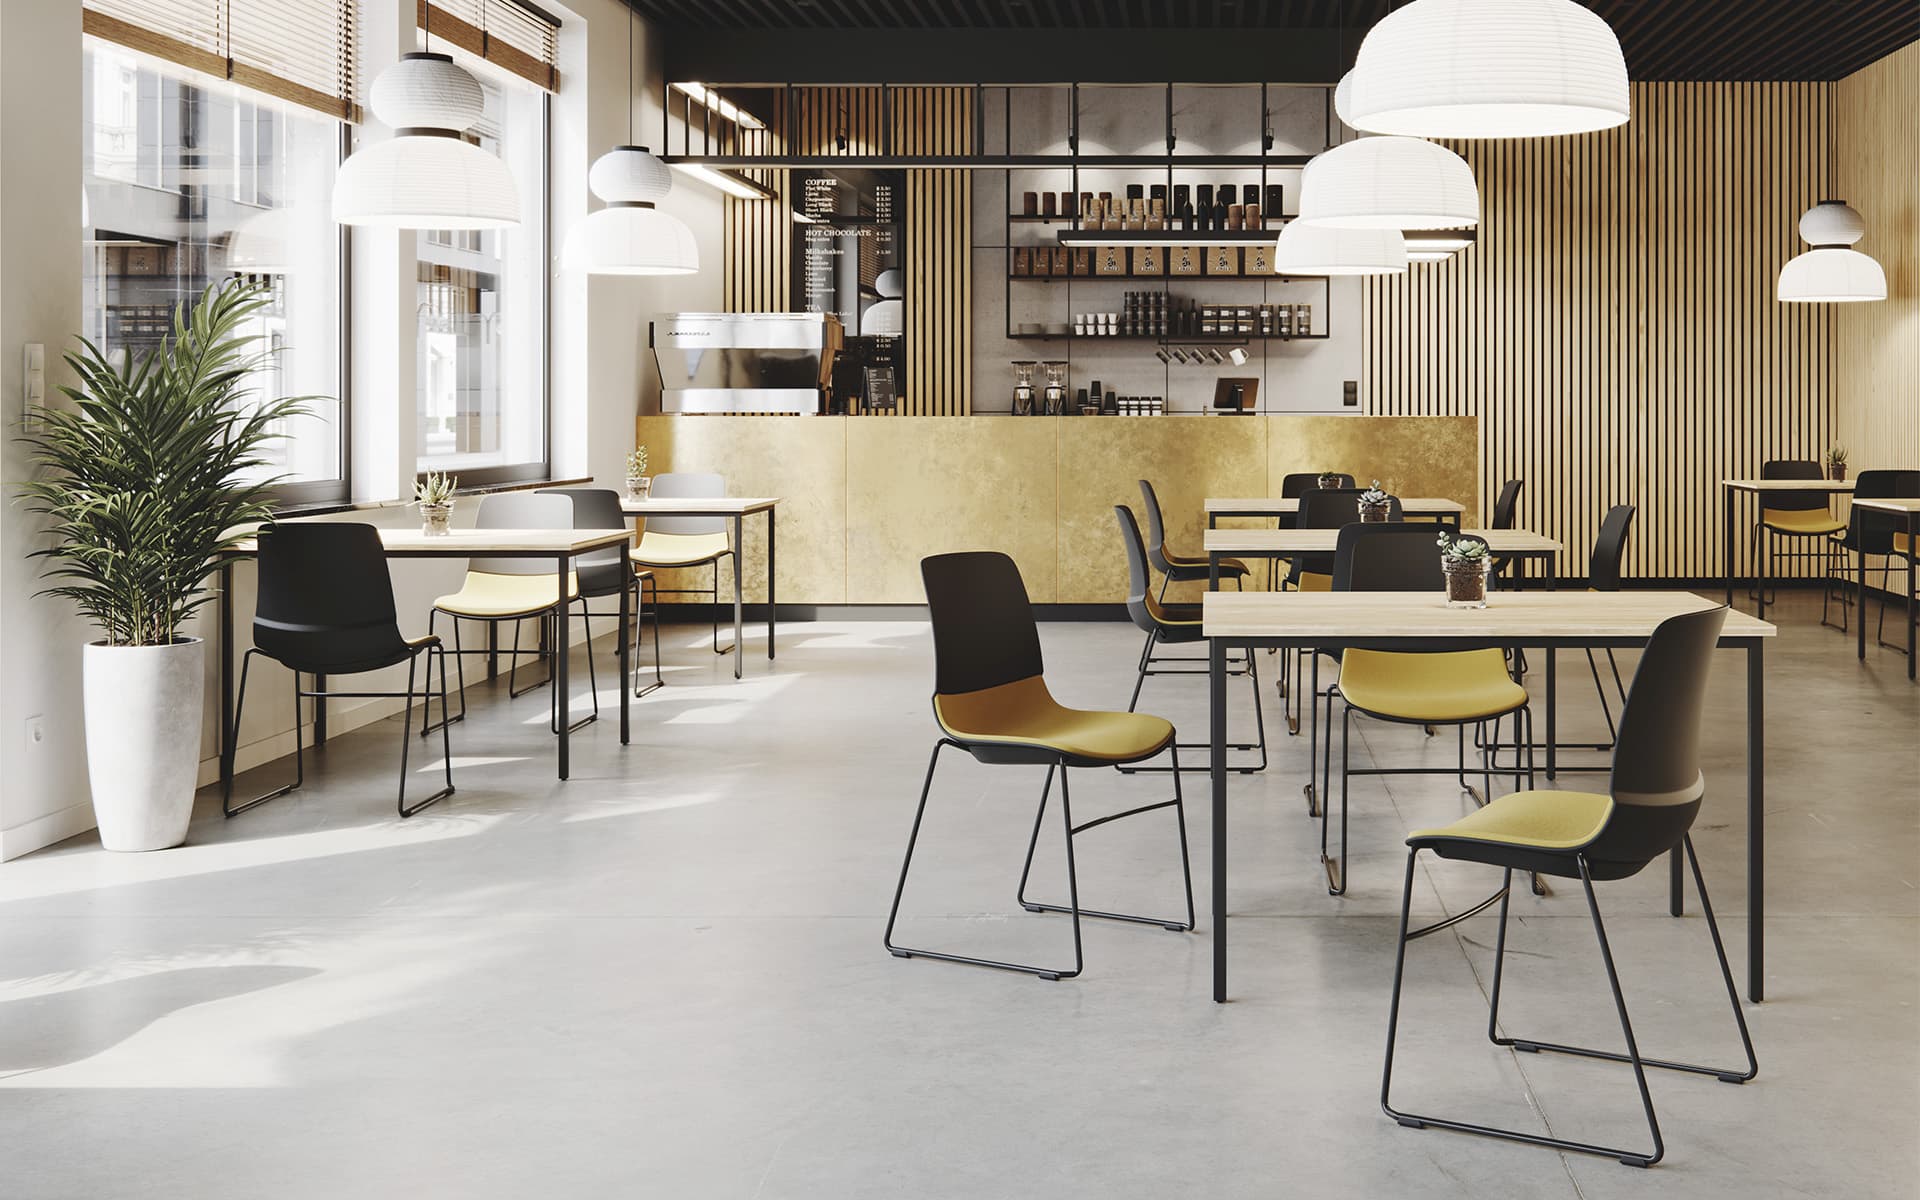 Several Patra Mika multi-purpose chairs by ITO Design in black with ochre-colored upholstery in modern coffee place